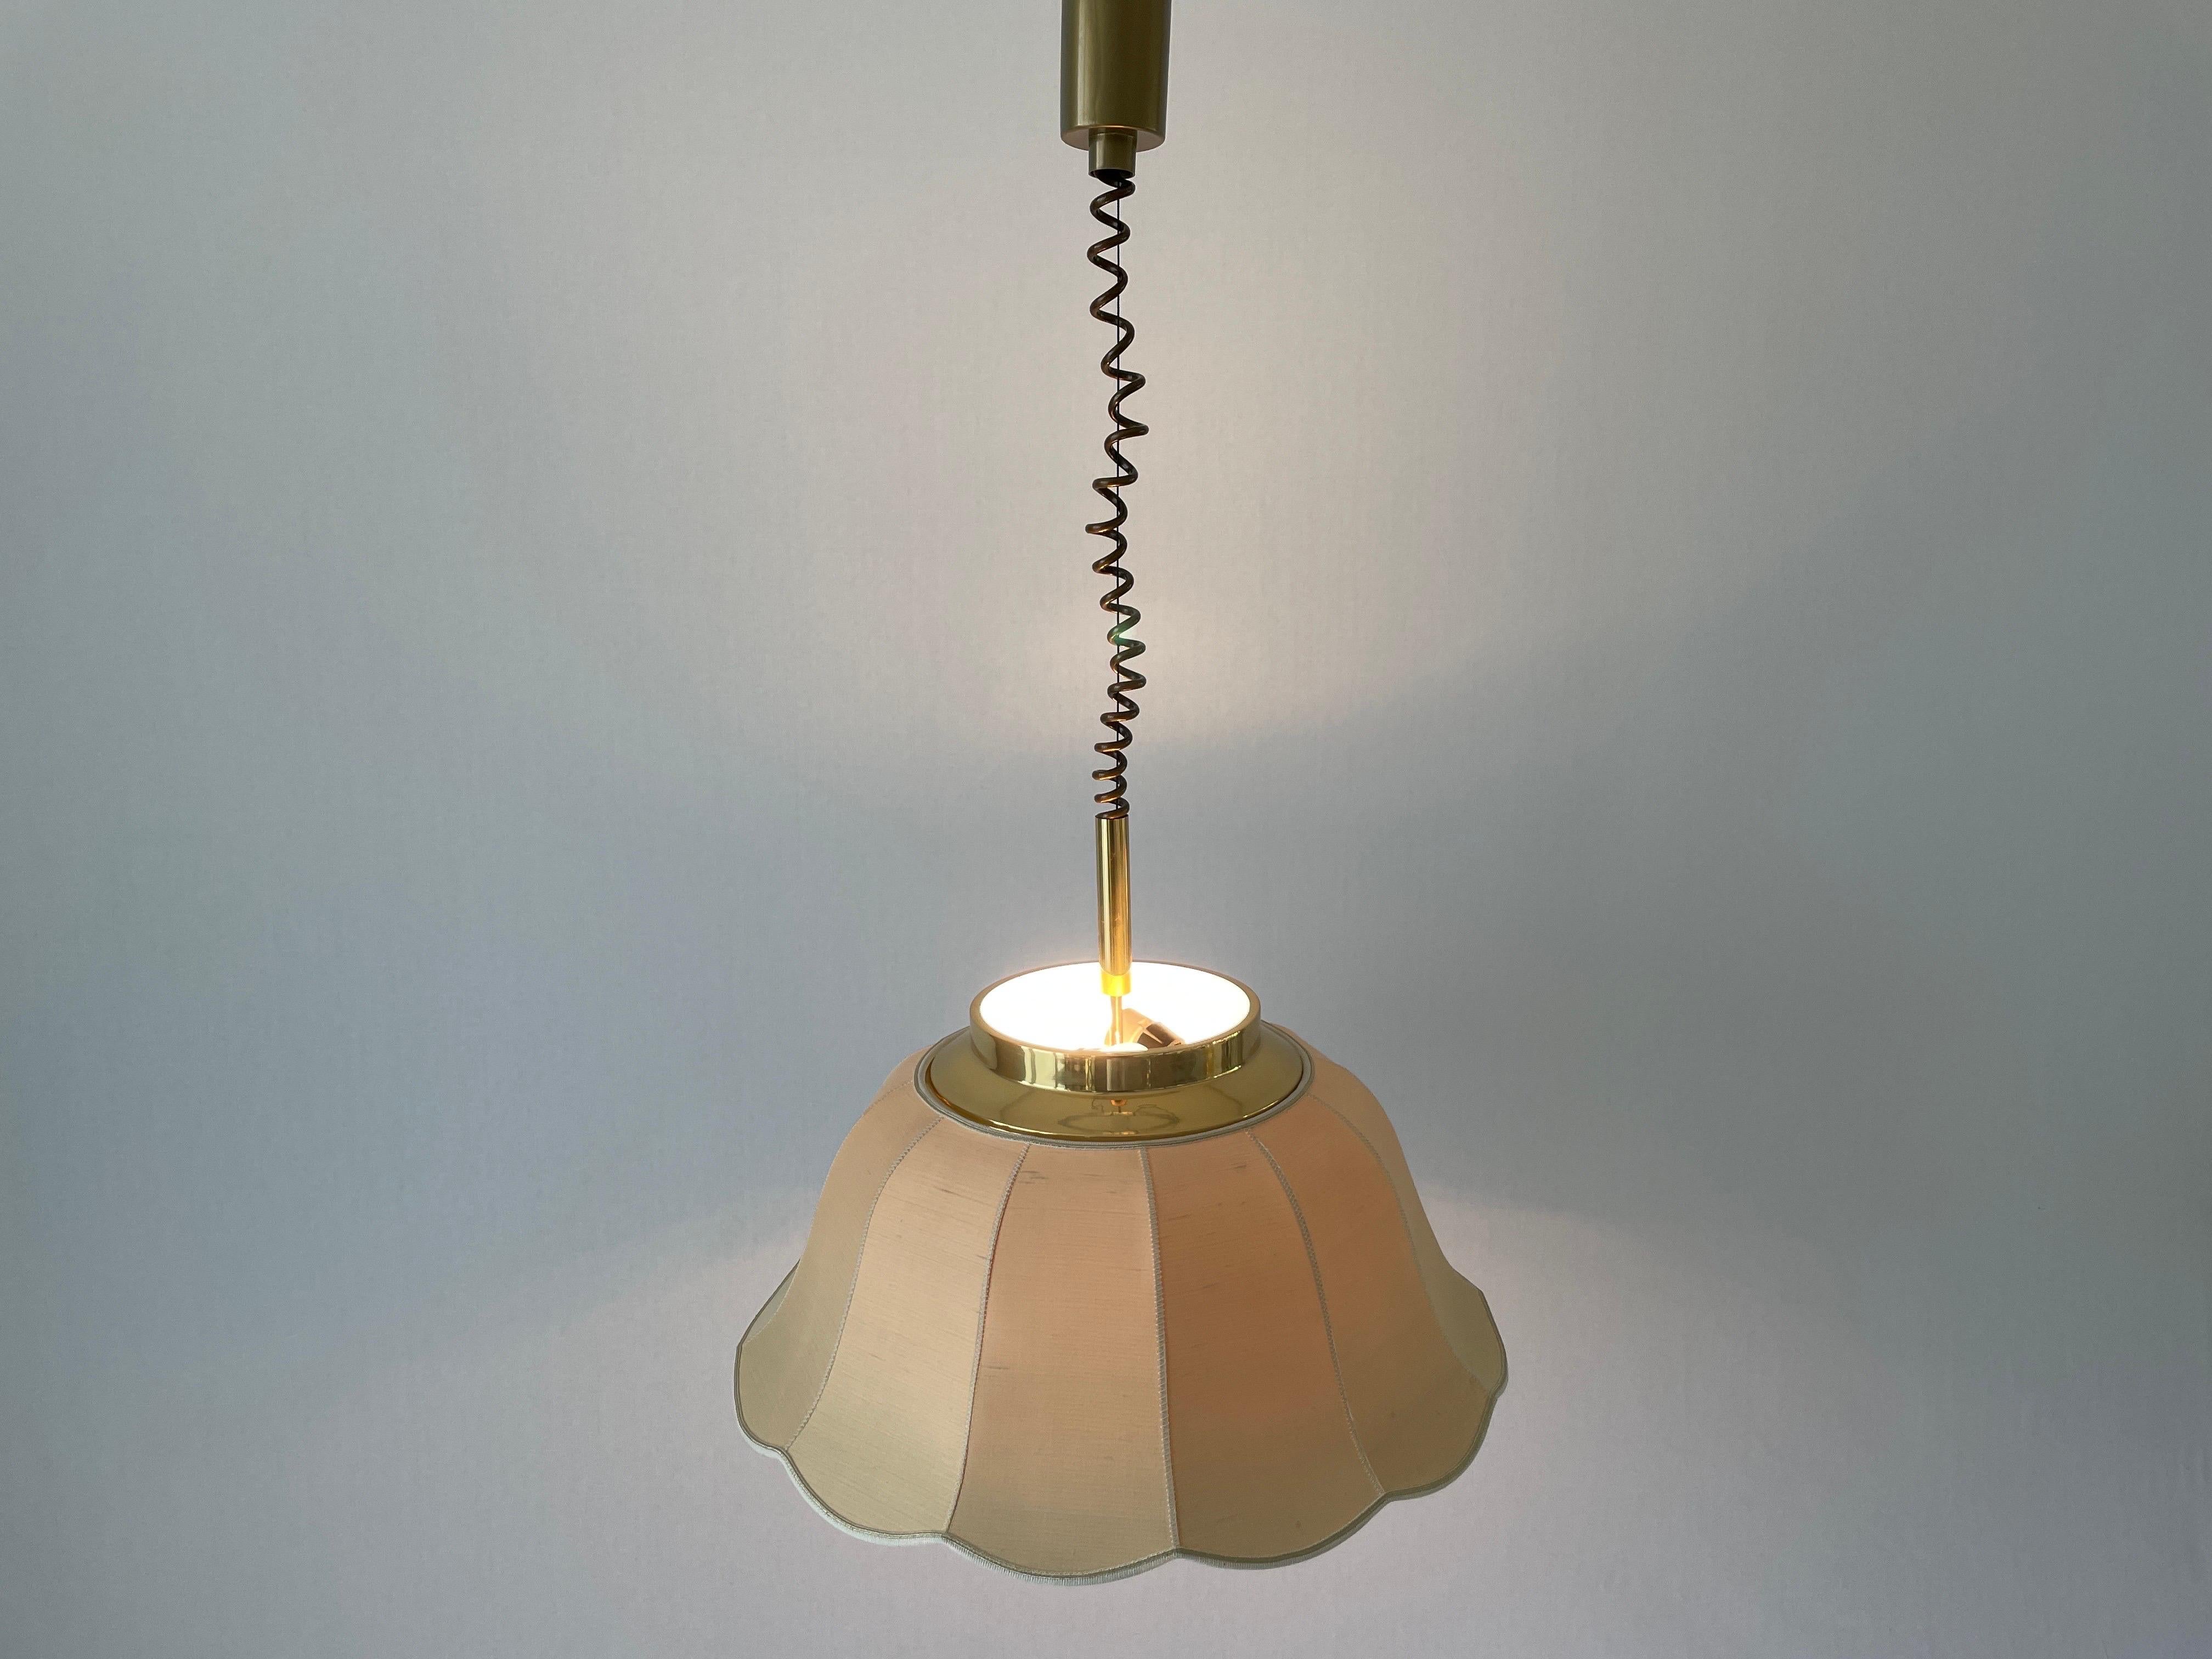 Fabric and Brass 5 socket Adjustable Shade Pendant Lamp by WKR, 1970s, Germany For Sale 7